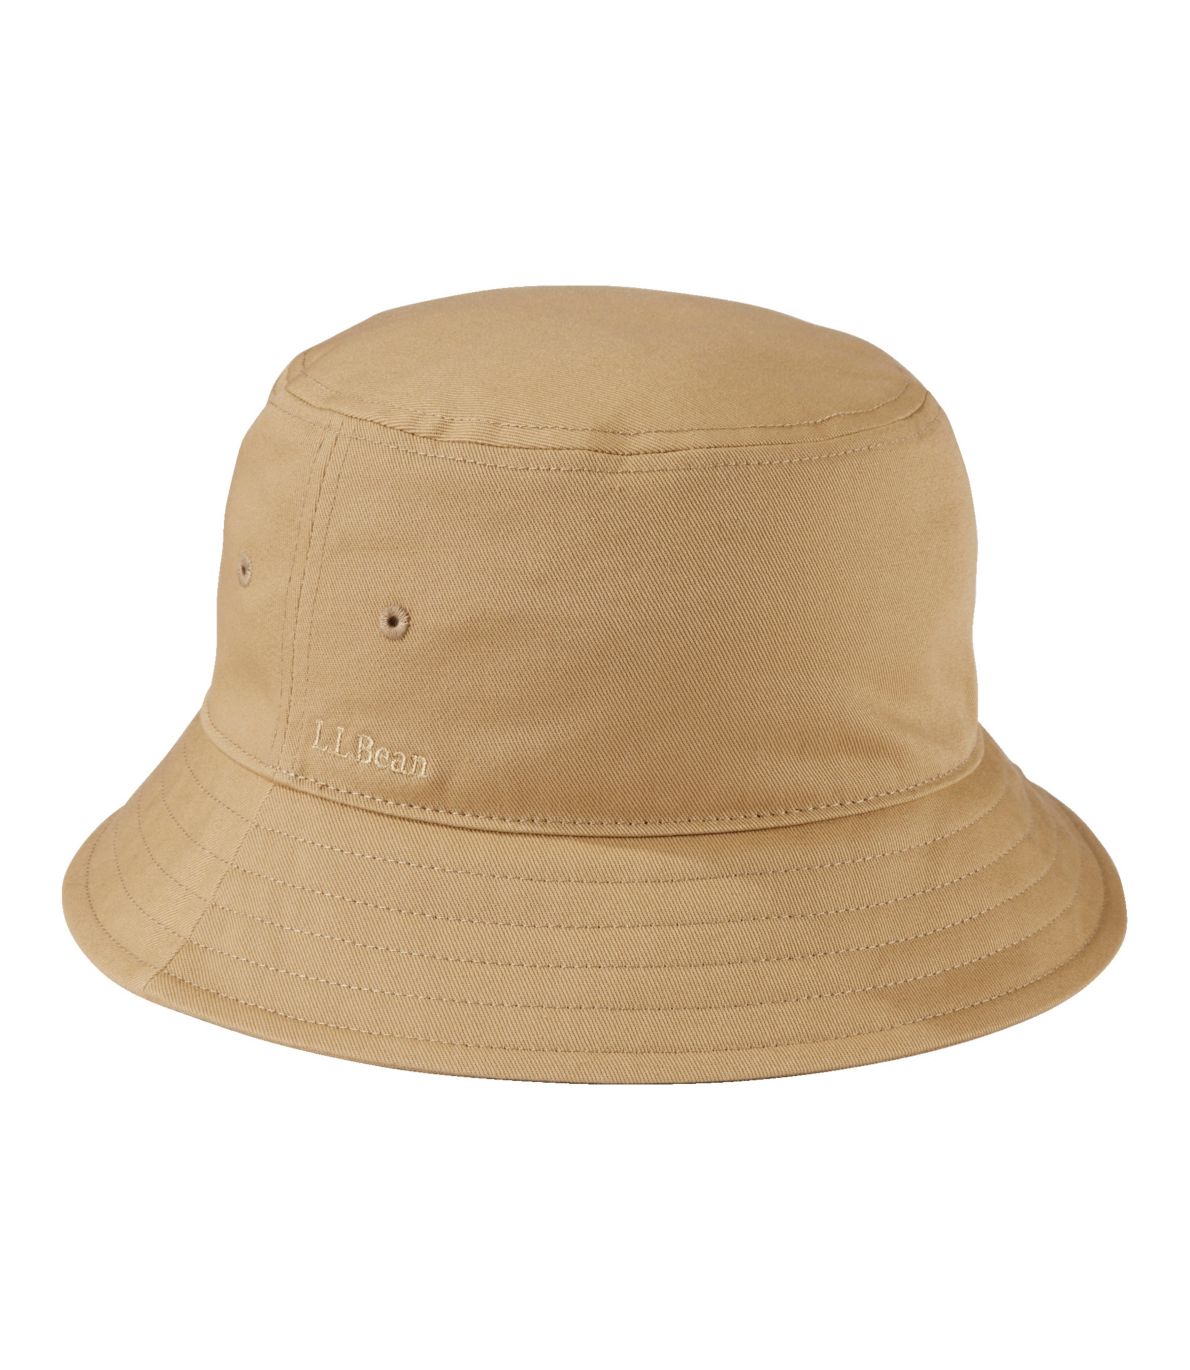 Adults' Cotton Bucket Hat